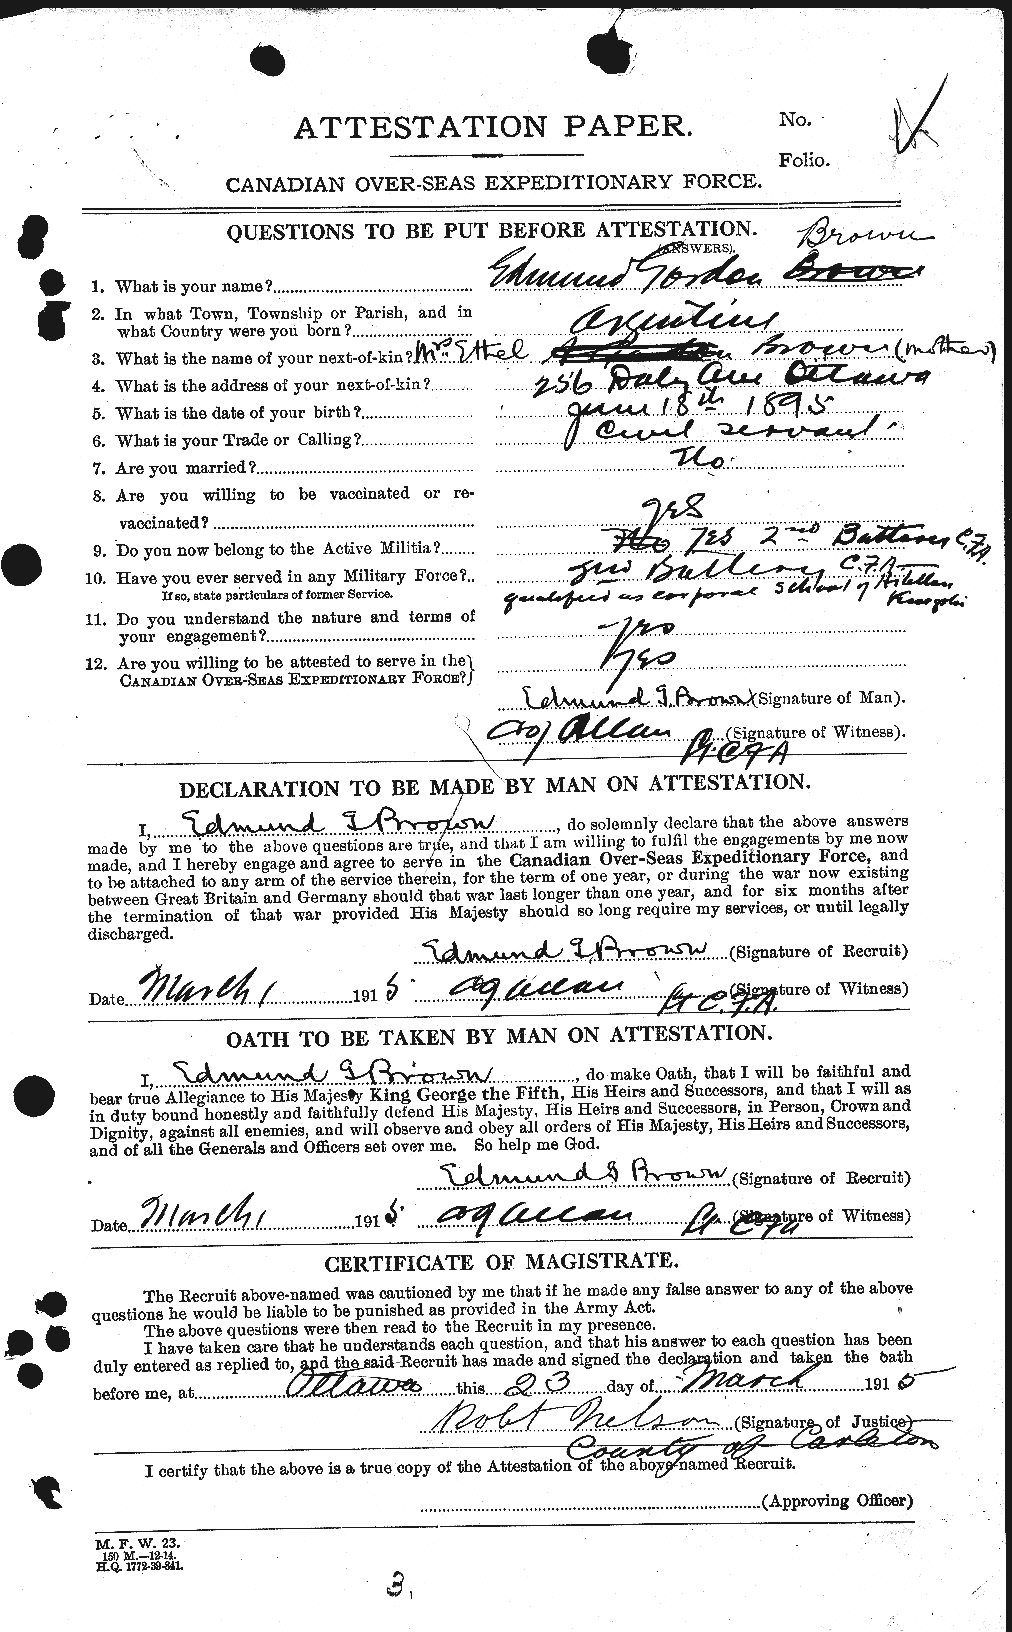 Personnel Records of the First World War - CEF 263329a